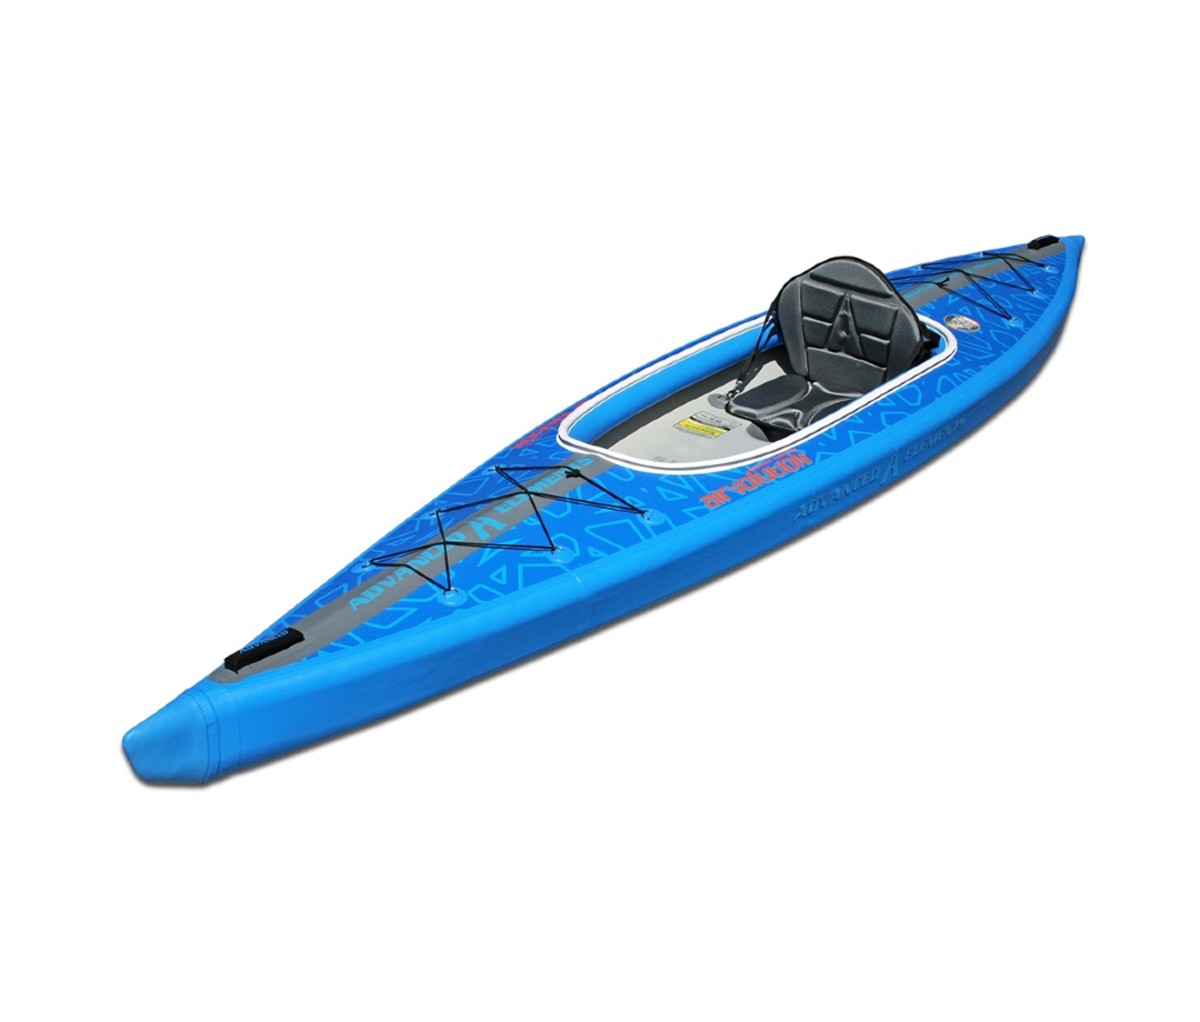 Add to you kayak quiver with one of these new specialized boats.